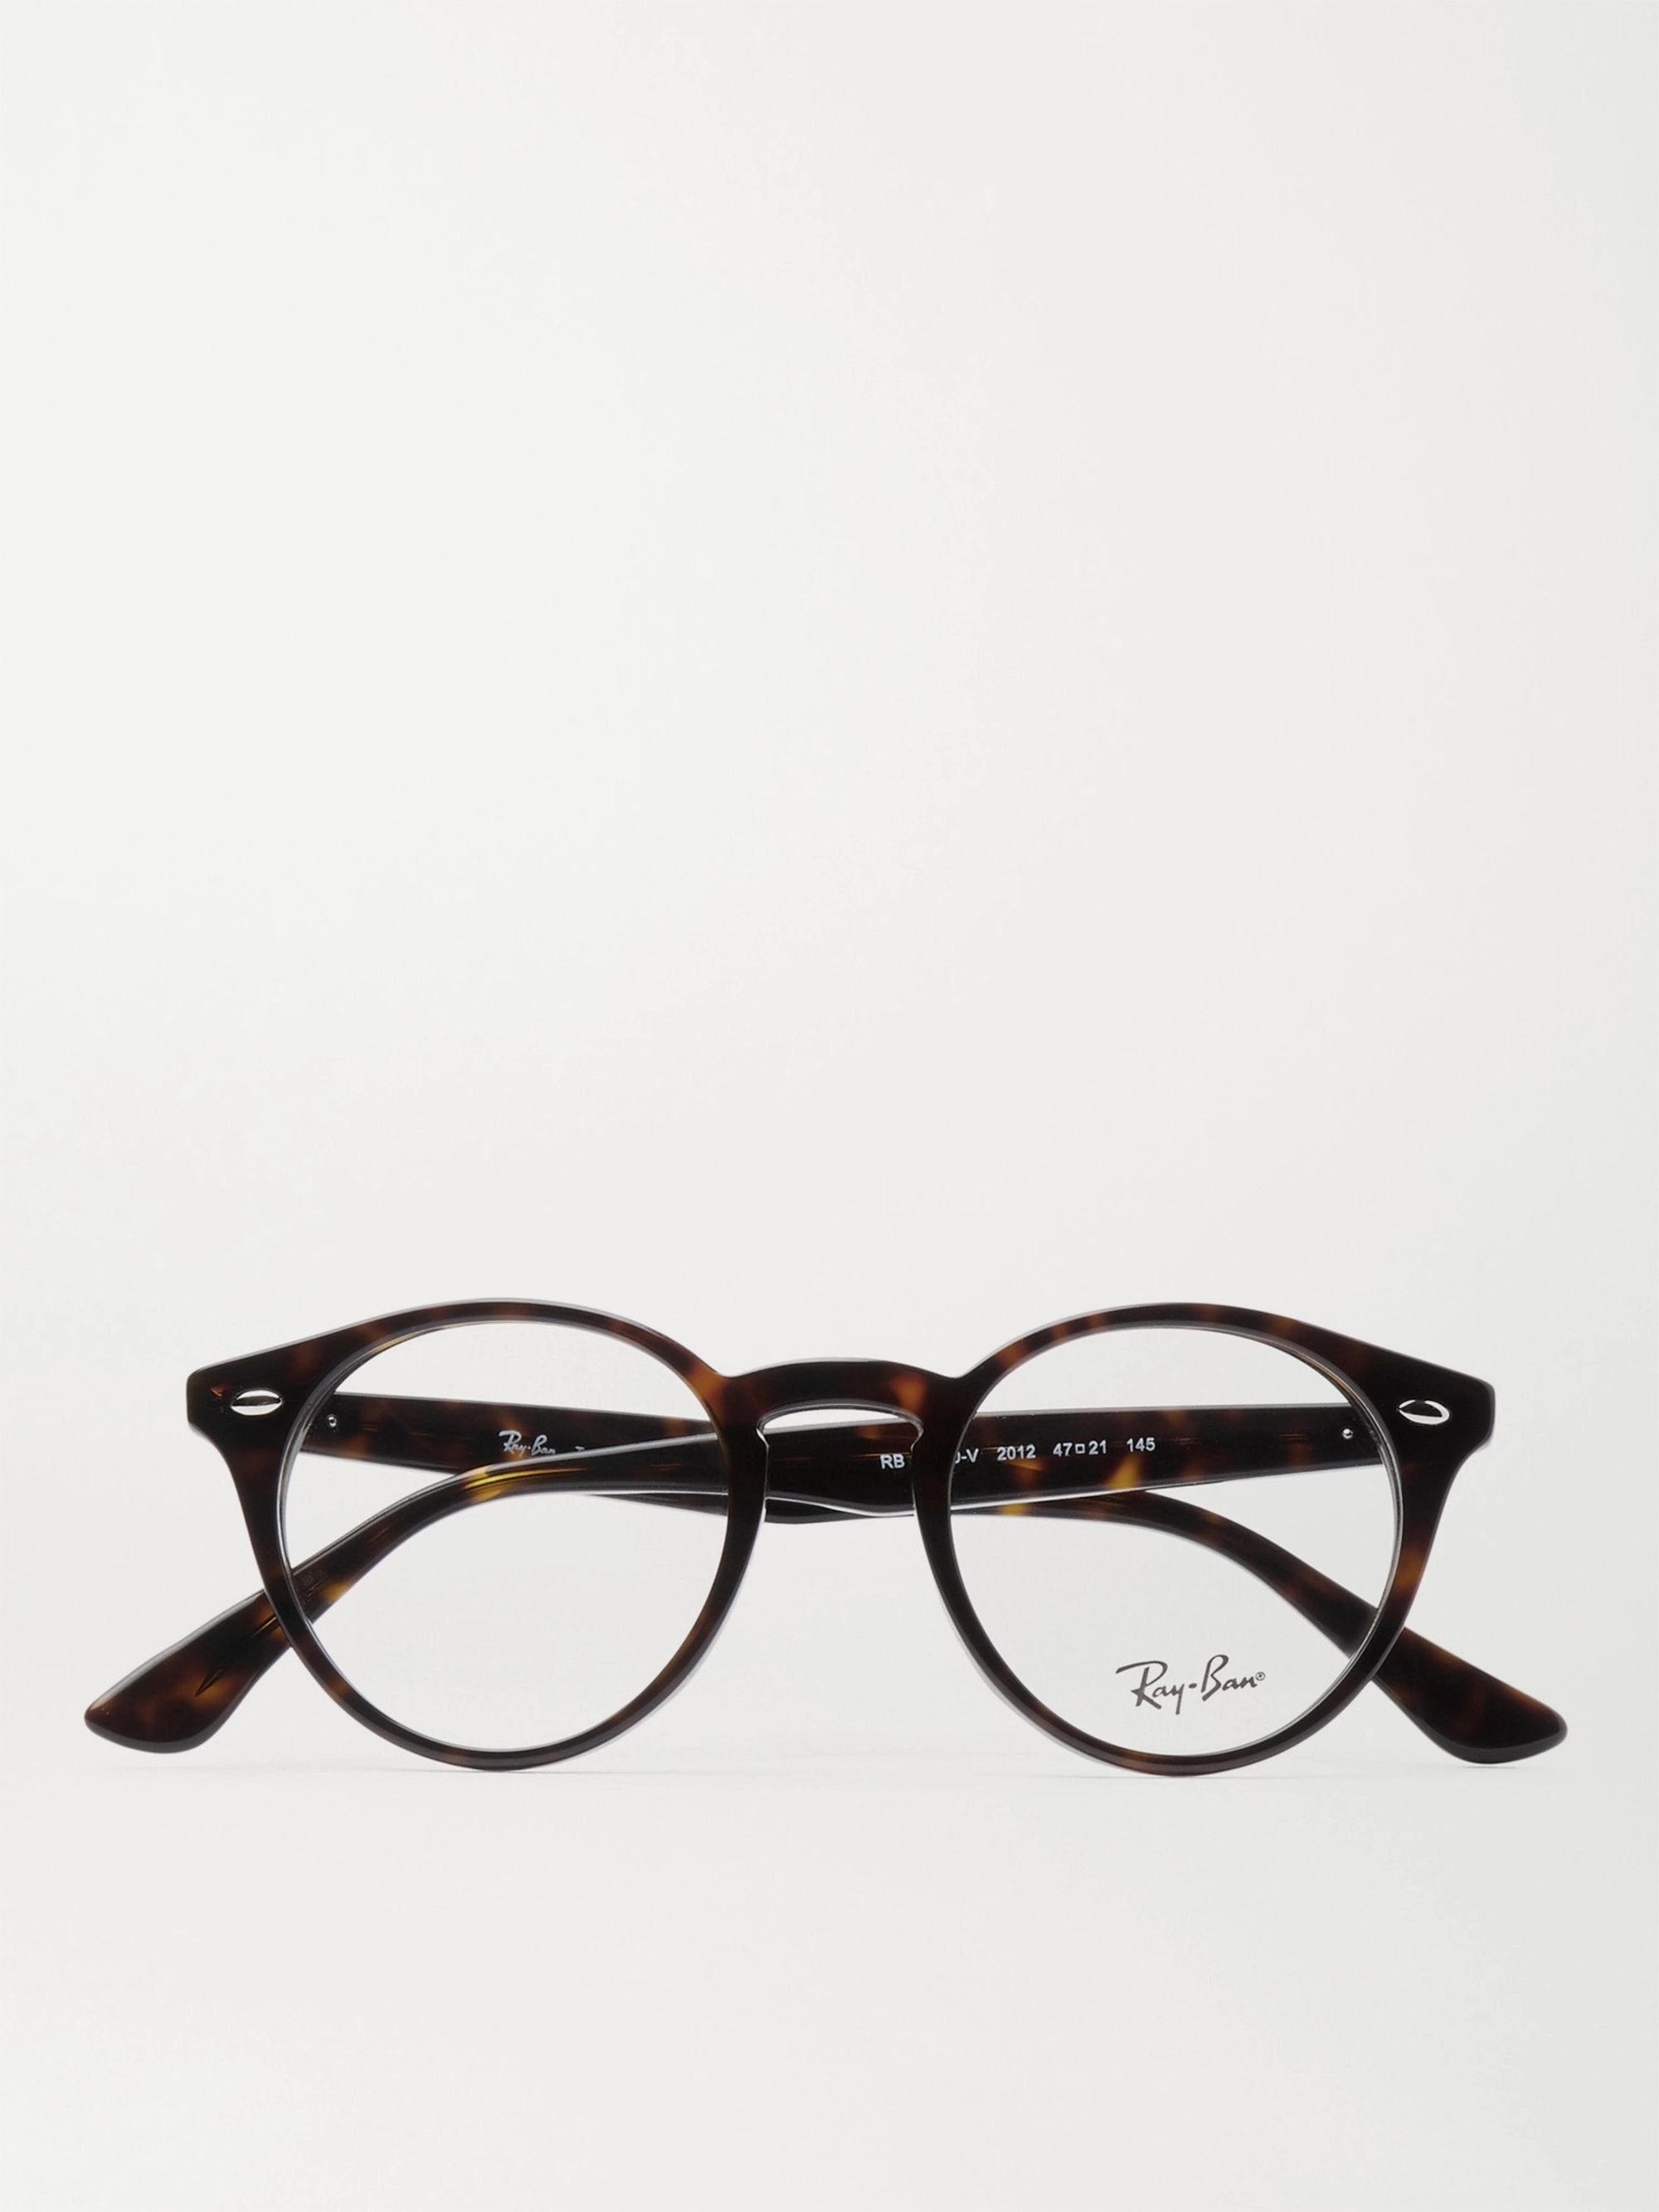 perfectly round glasses frames